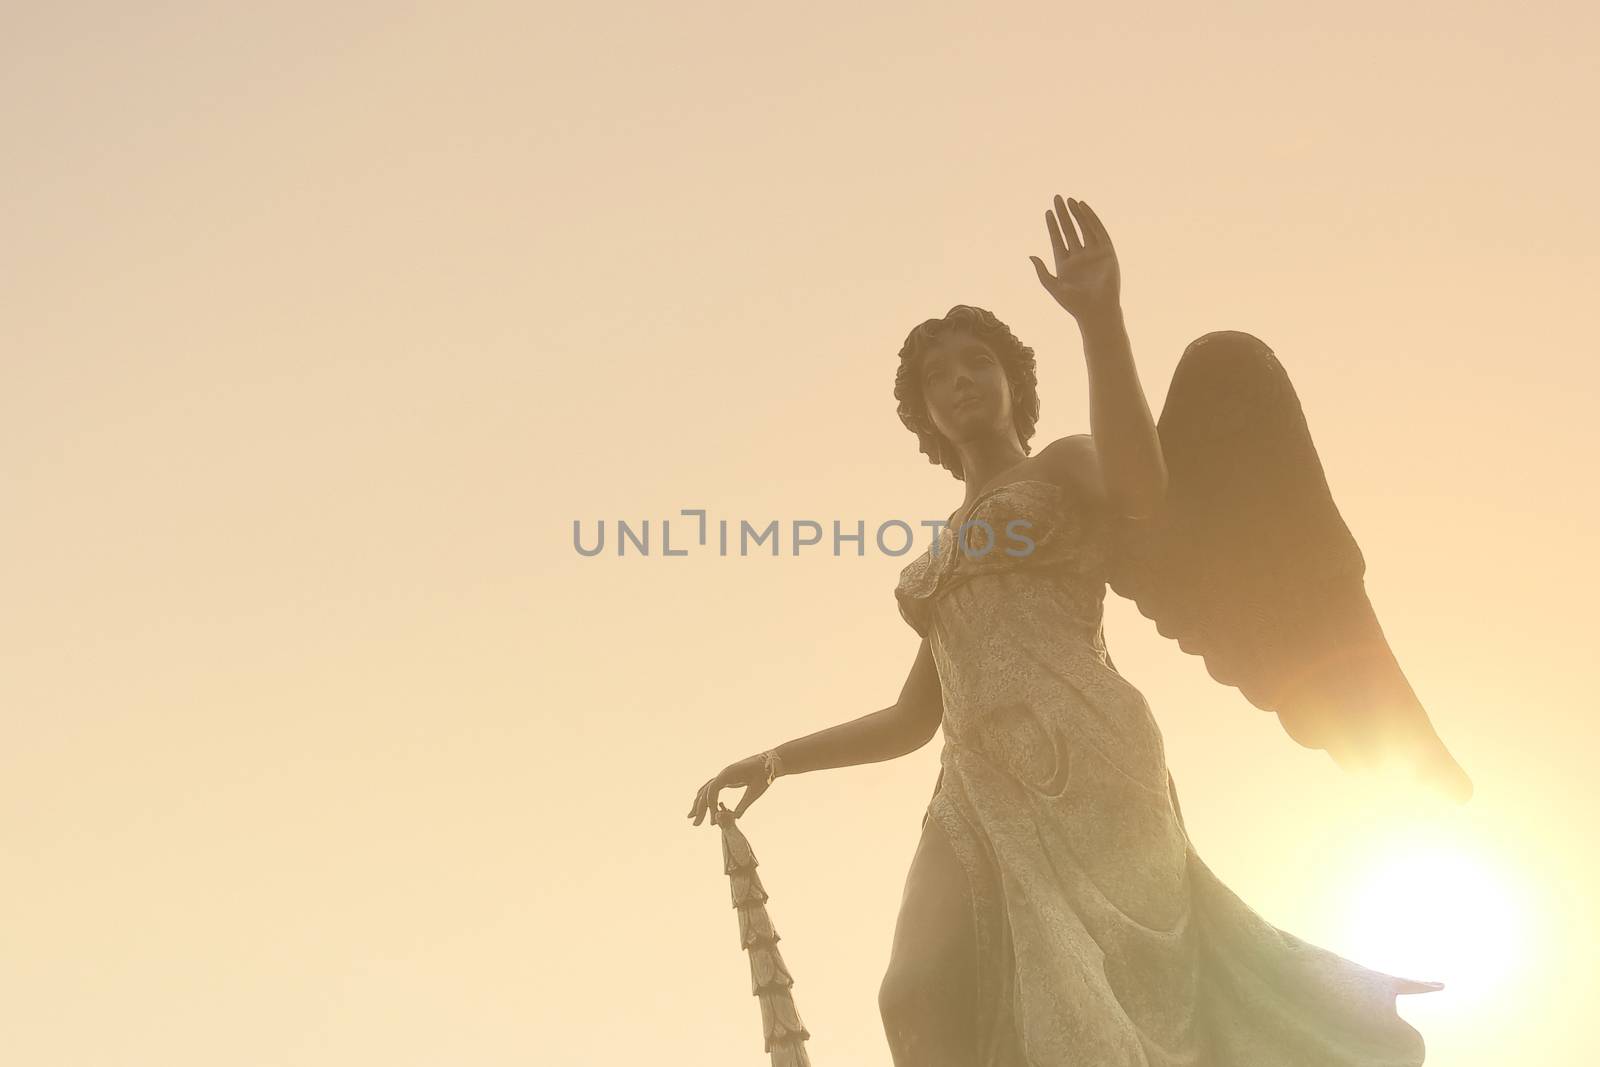 Beautiful angel statue in sunlight before sunset, faith and religion concept by asiandelight